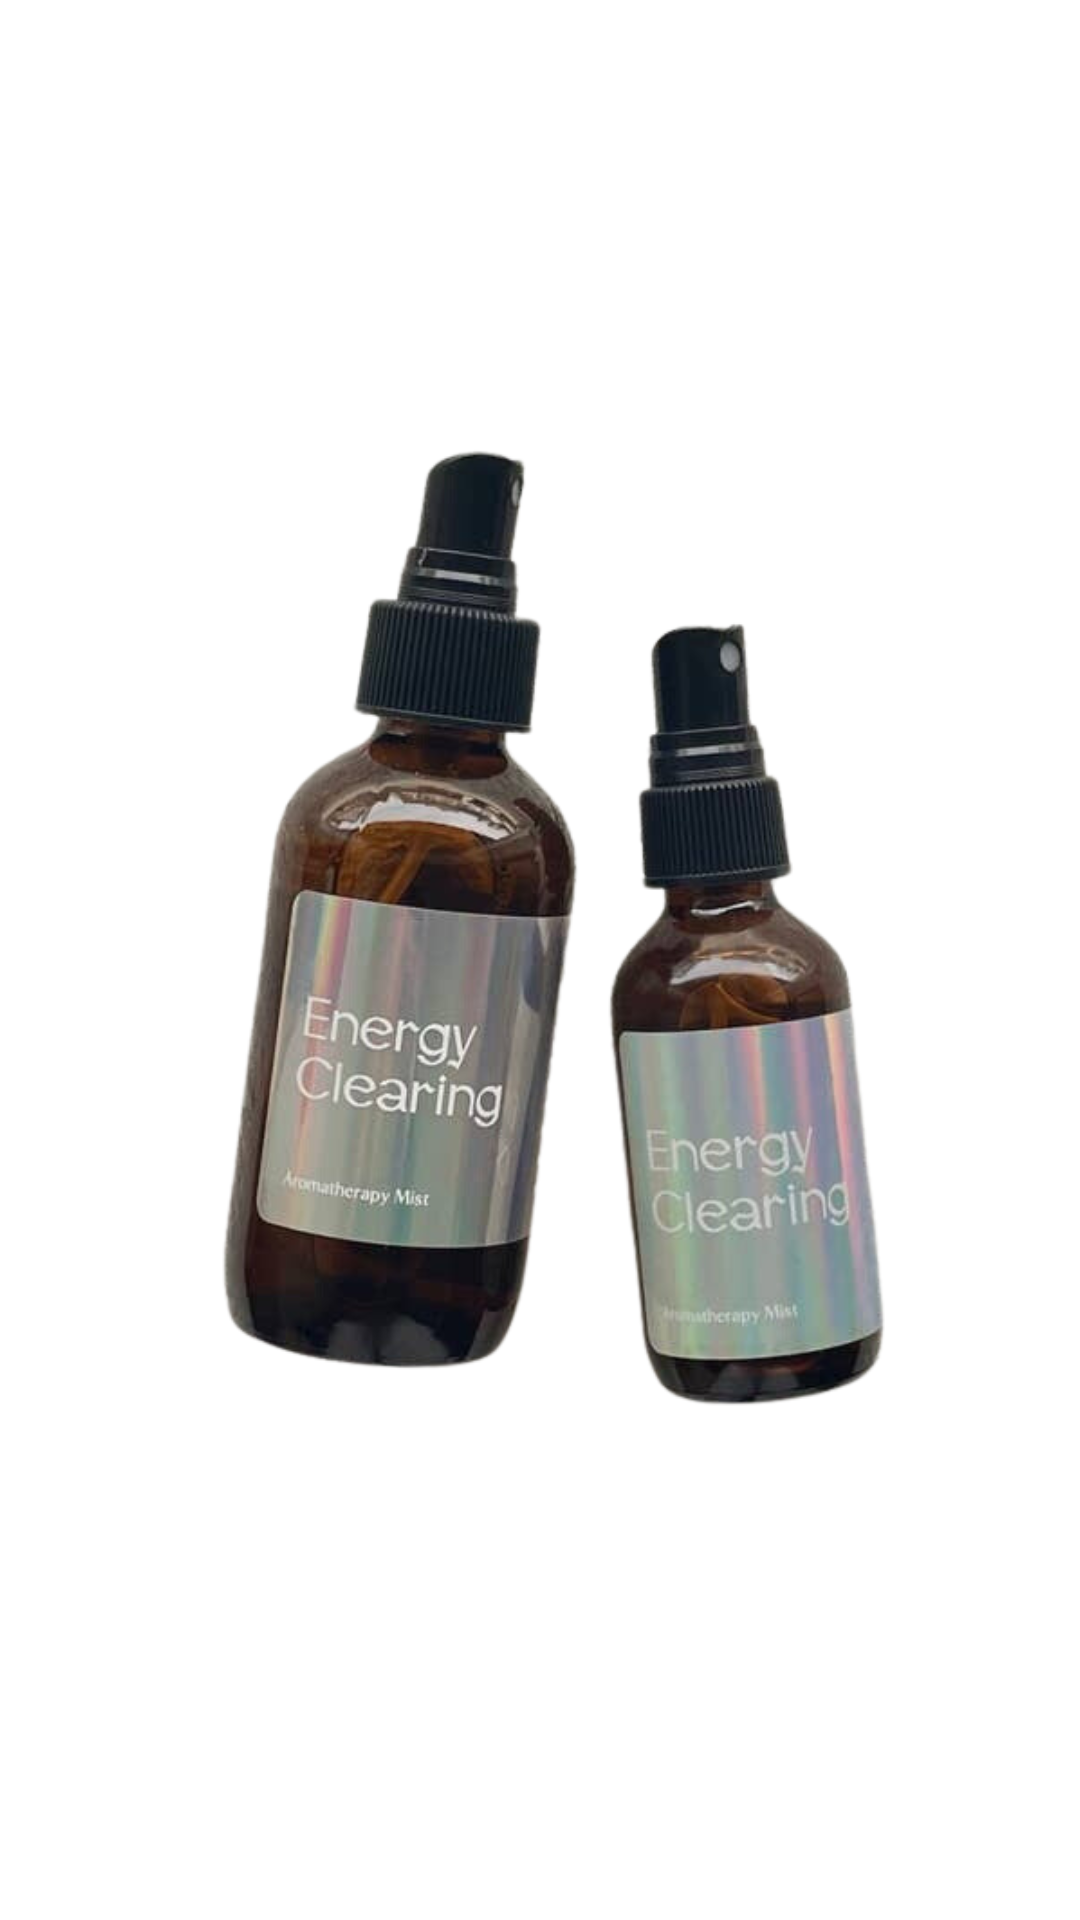 energy clearing aromatherapy spray